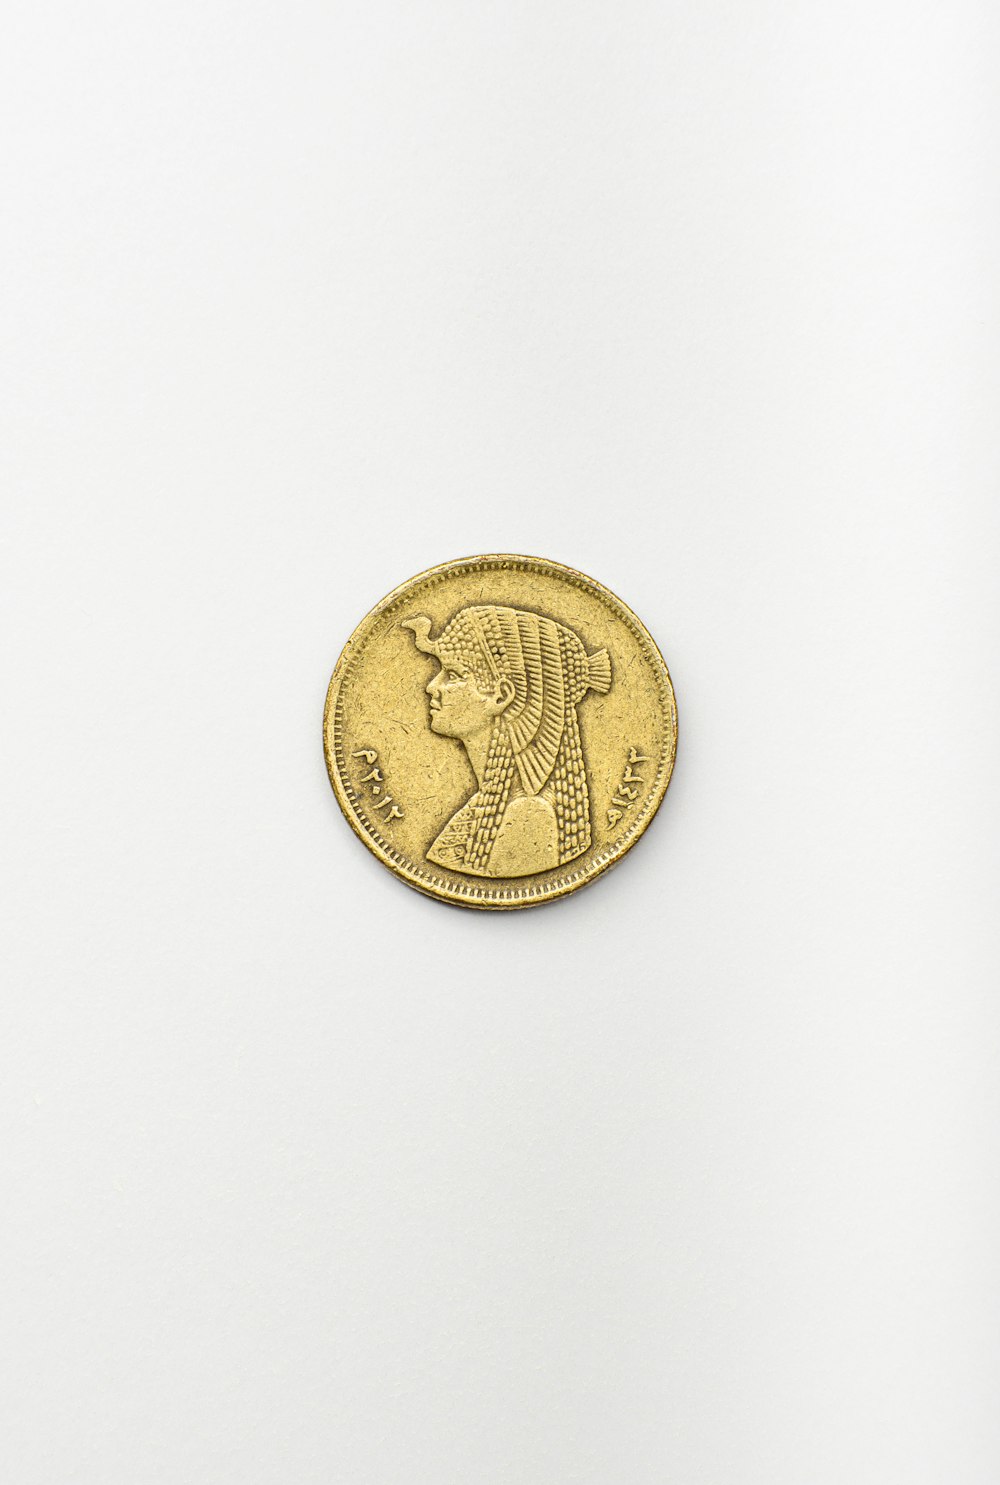 a coin with a design on it